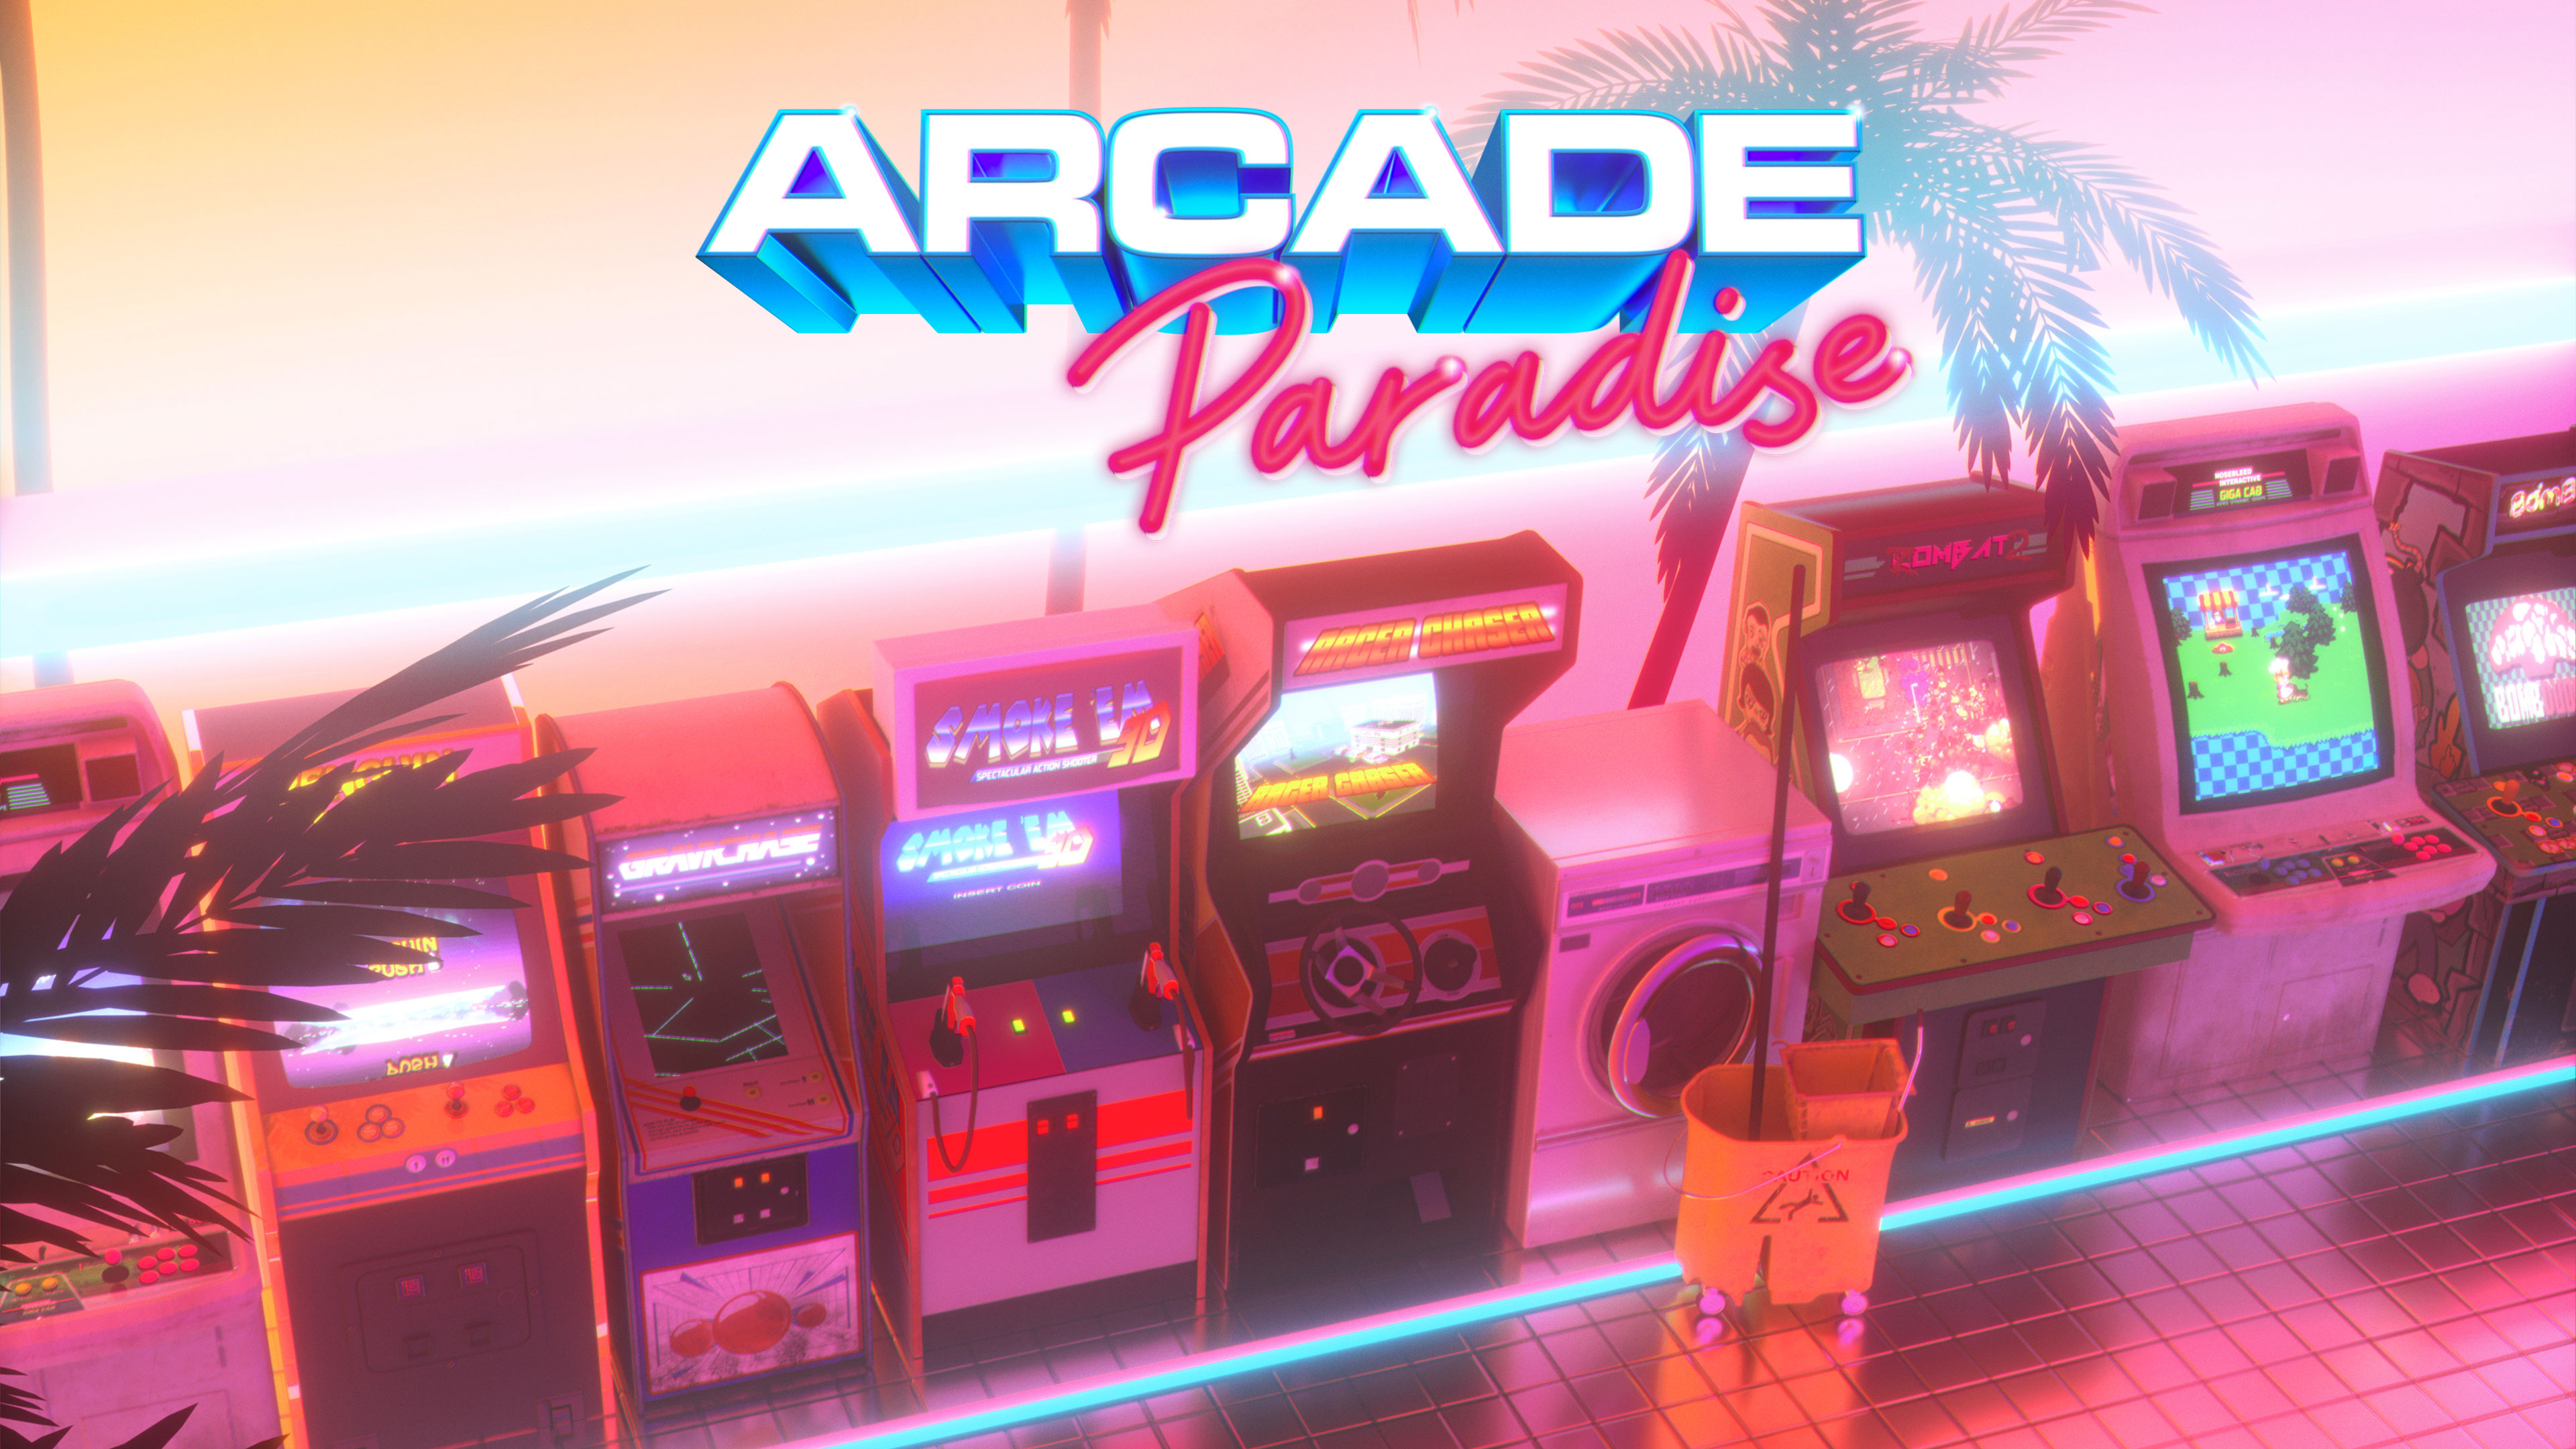 Google built an online HTML5 game inspired by the classic arcade